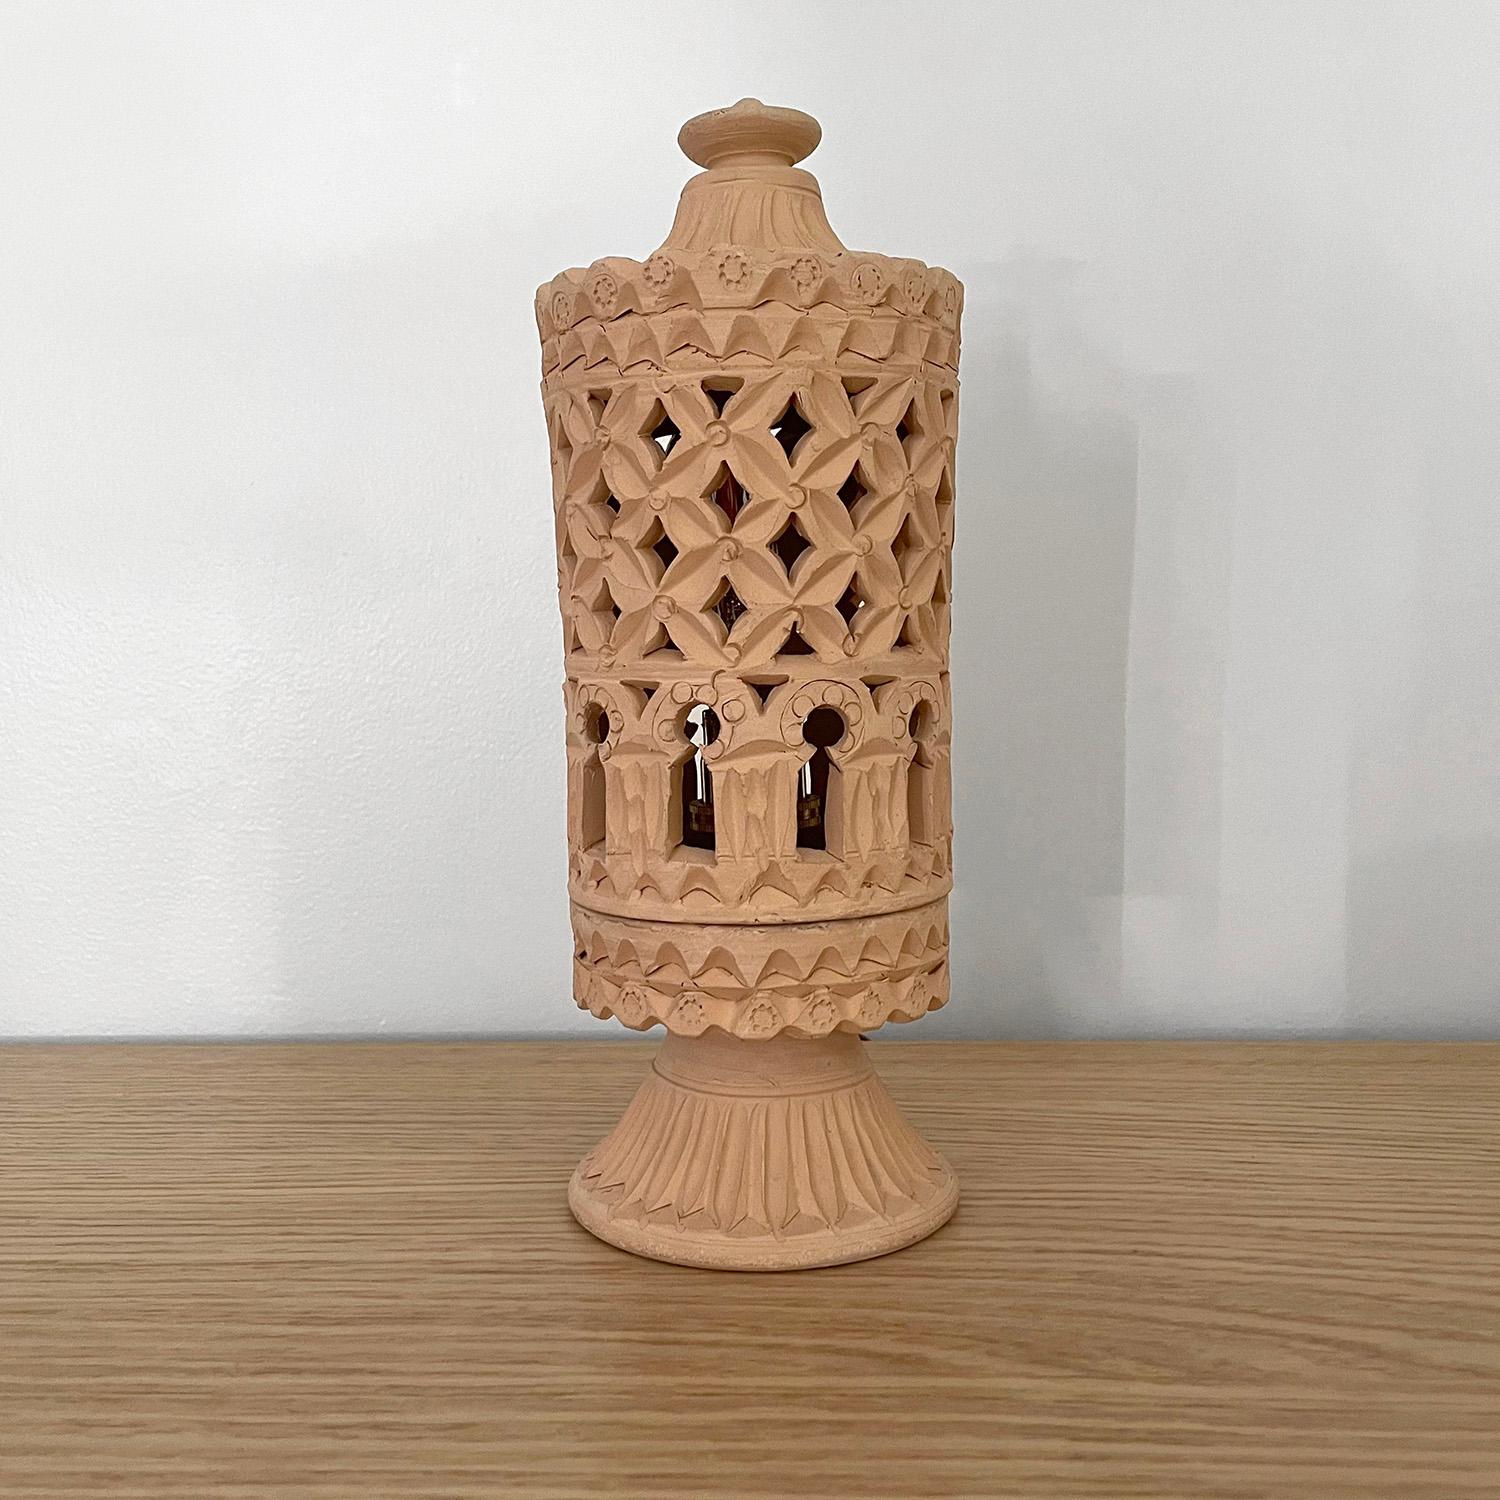 French Moroccan terracotta lamp
1970s
Organic composition and feel
Beautifully hand sculpted piece
Geometric cut outs create an illuminated light pattern
Delicately etched rosette detail around the base
Newly rewired
Single socket candelabra base 


